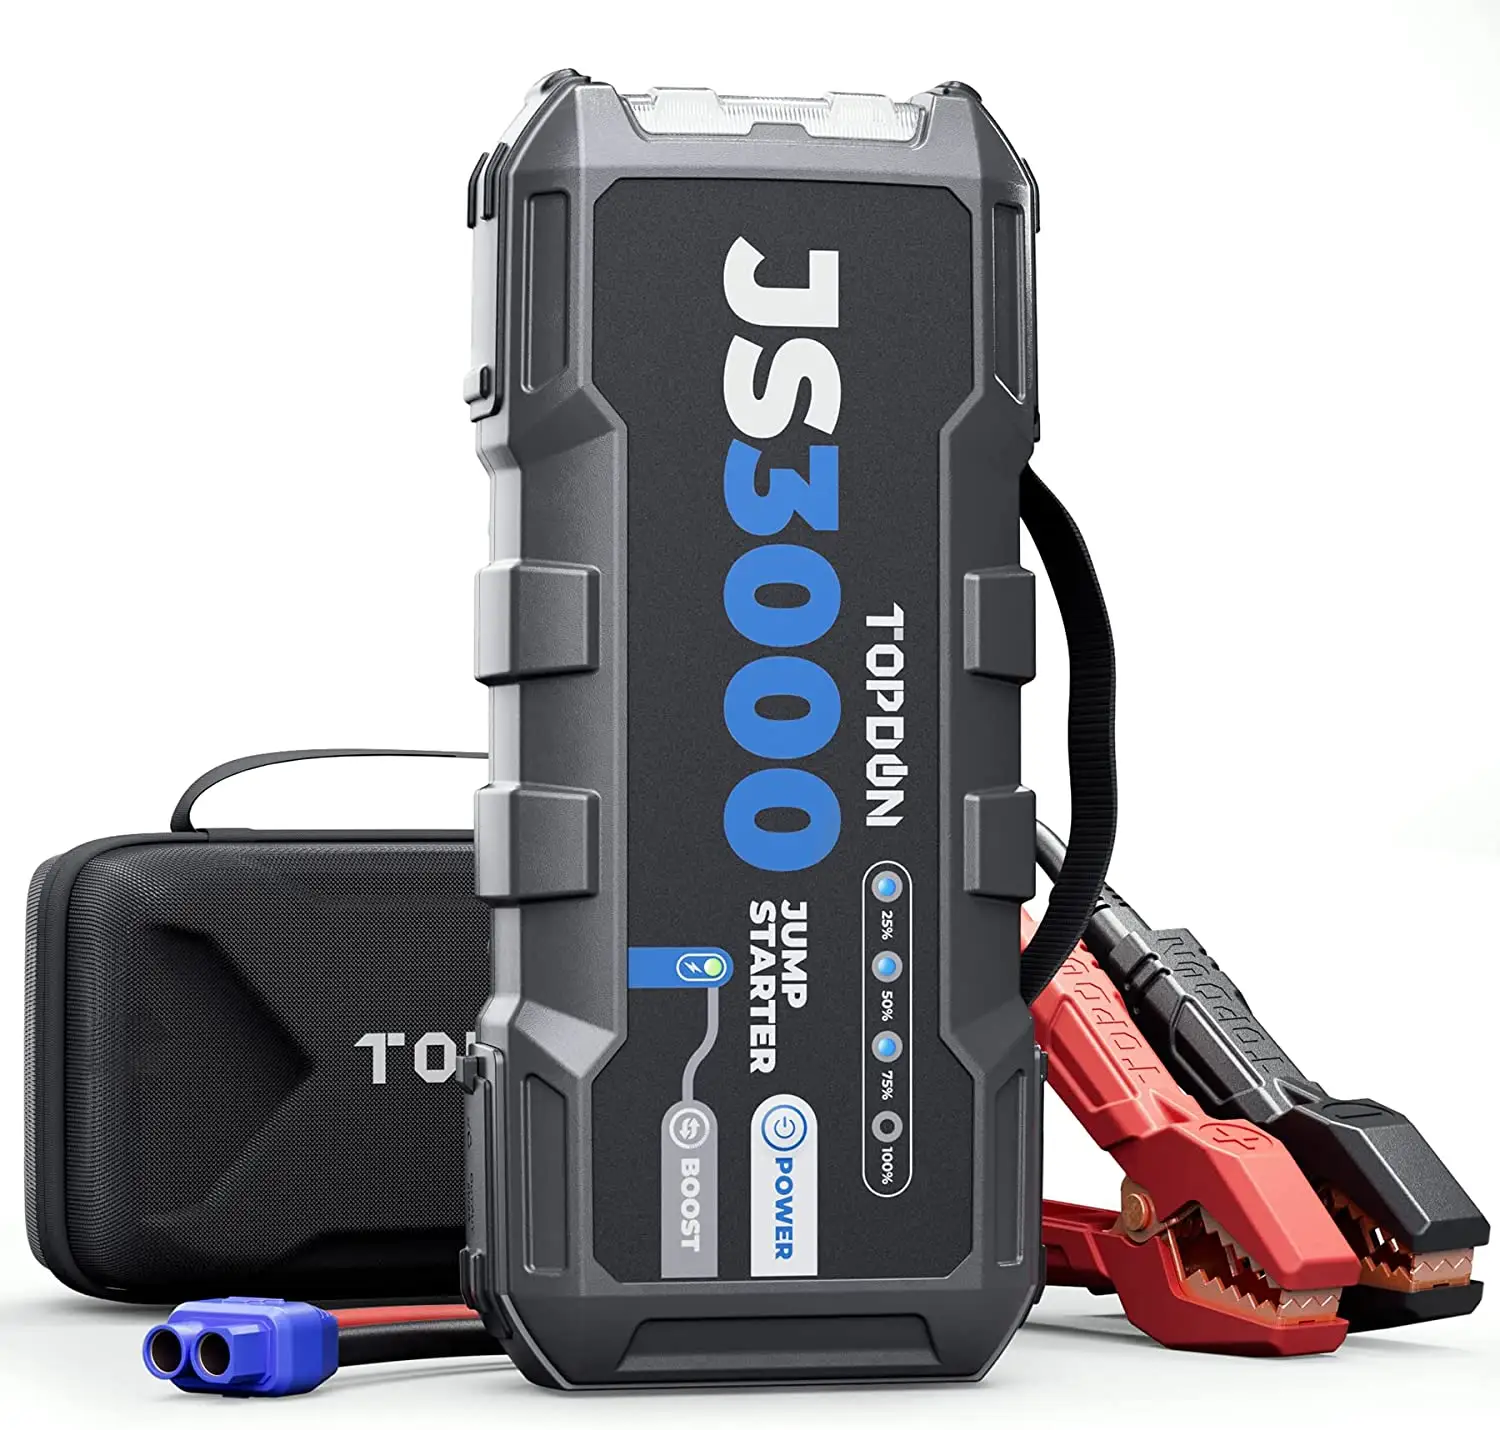 Booster Portable Multi Function Super Capacitor TOPDON JS3000 Multi-function Battery Booster Powerbank Jump Starter Power Bank For Car